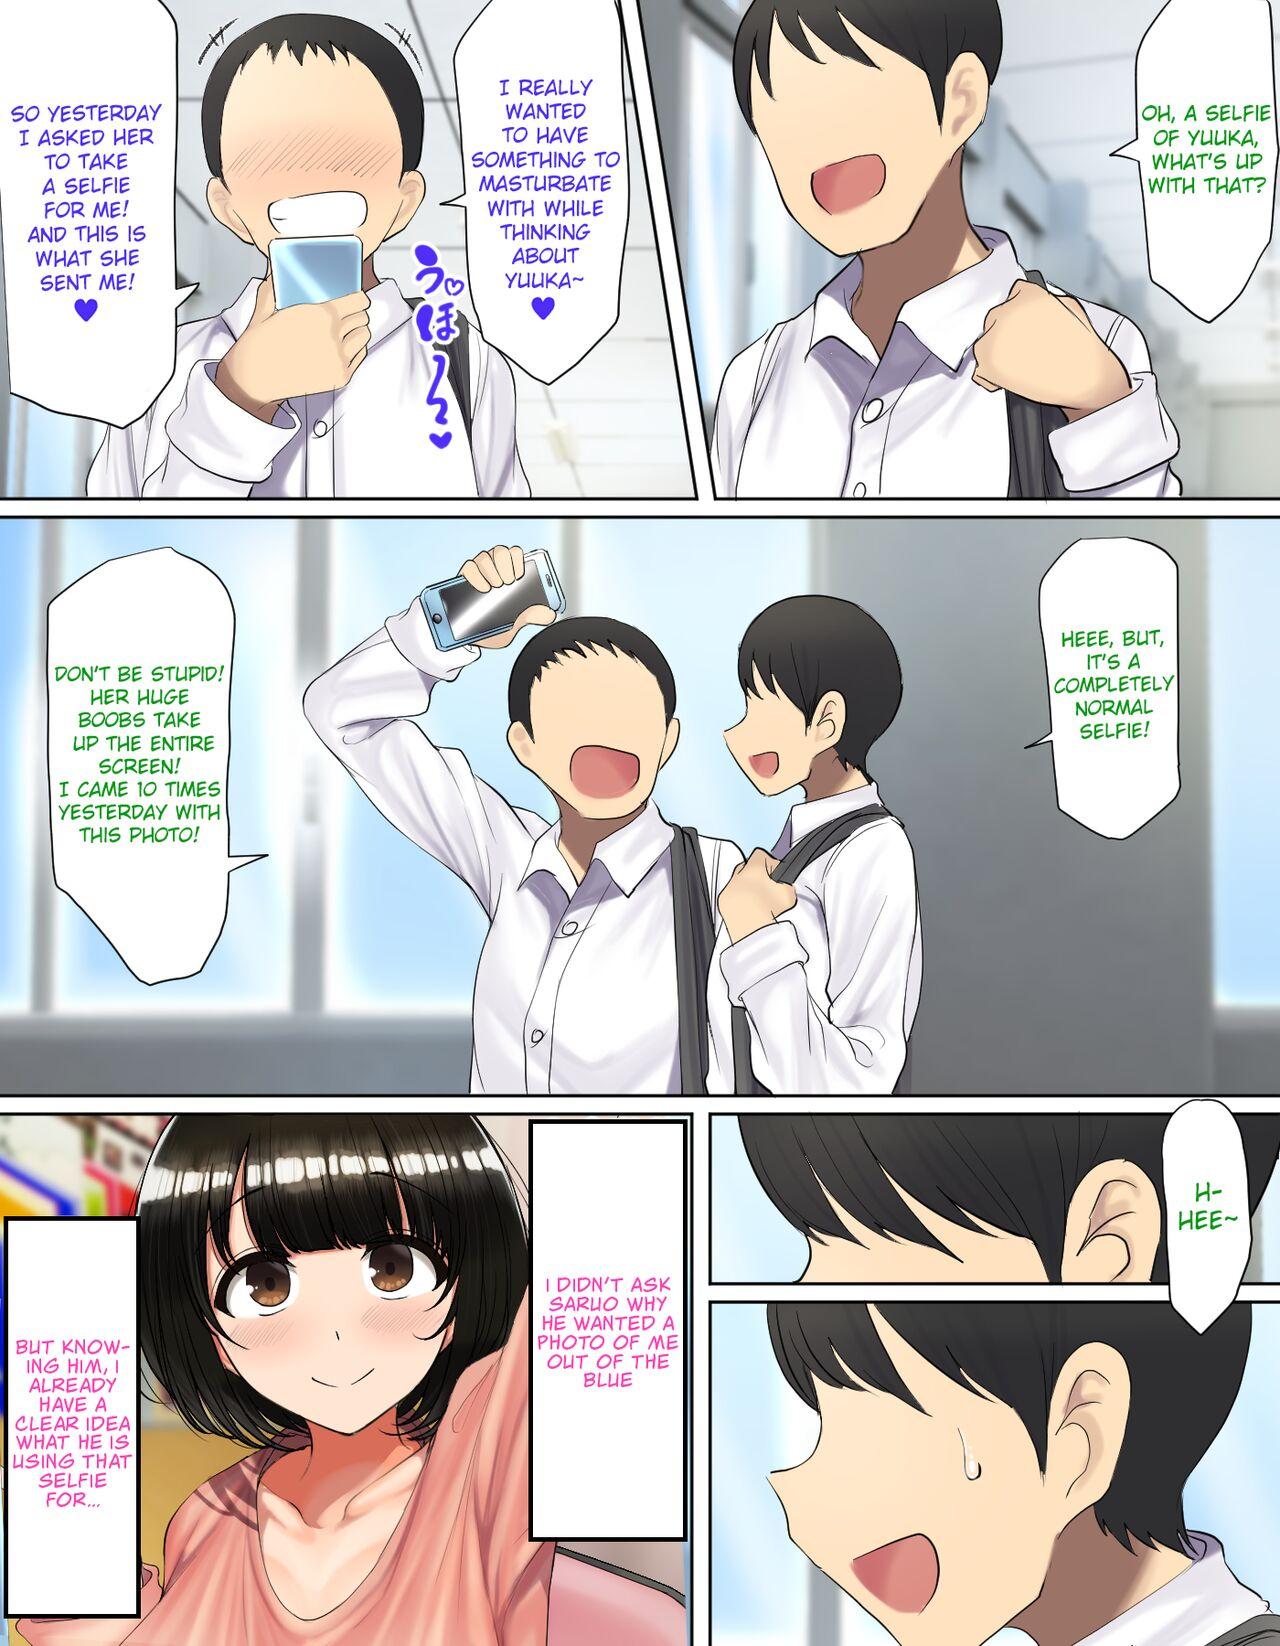 Women Sucking Dicks YUUKA'S VERSION of Because my childhood friend is not interested in sex, I fucked his friend instead - Original Tanned - Page 10